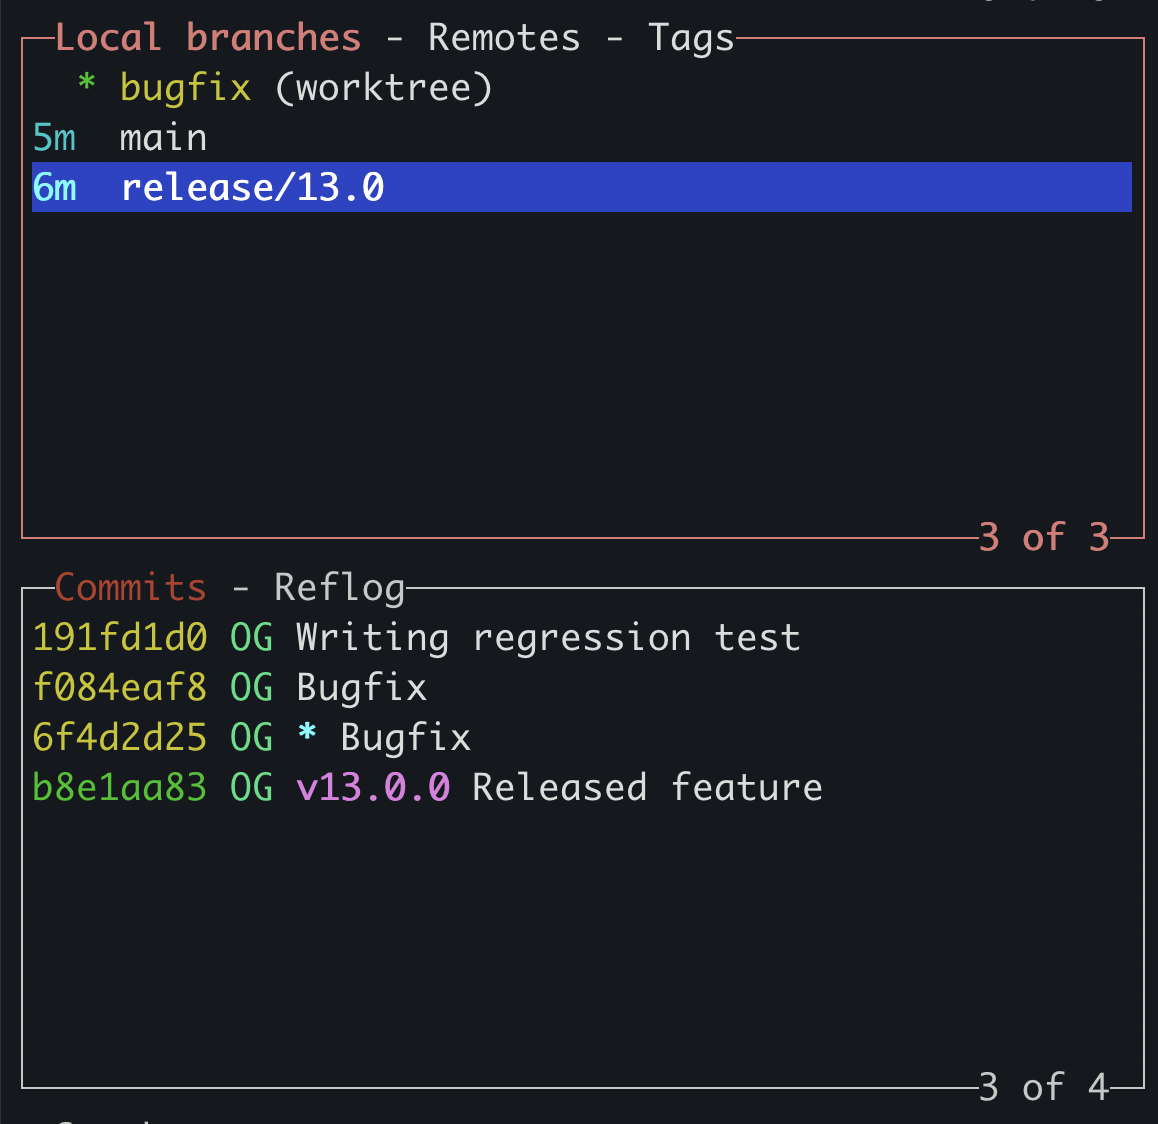 Two commits rebased onto release brnach